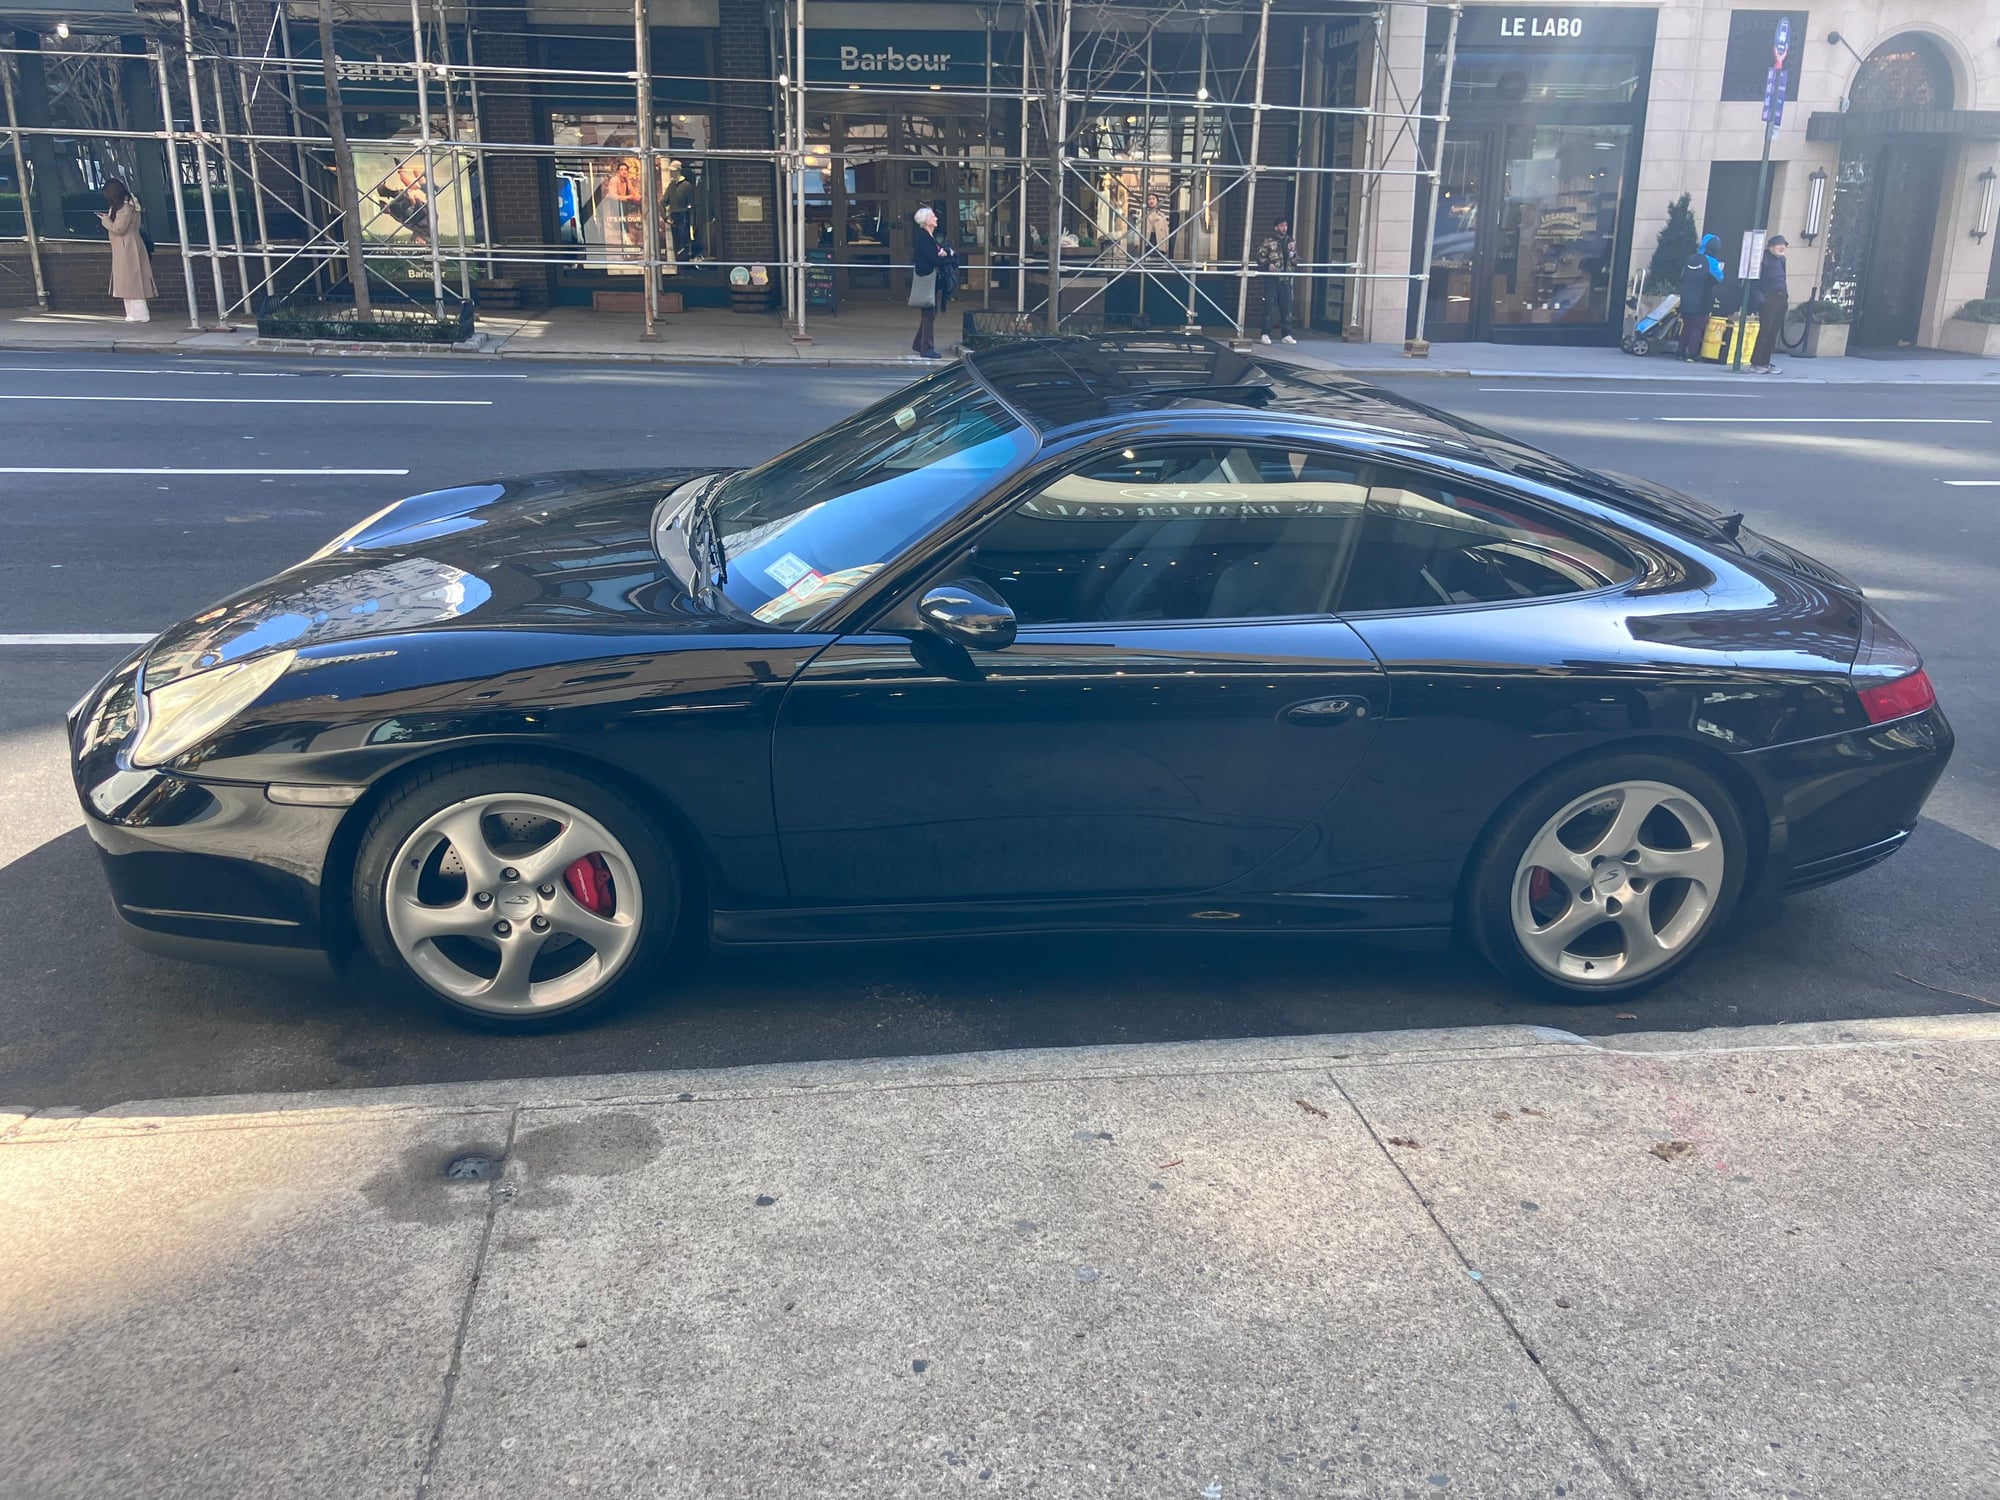 2002 Porsche 911 -  - Used - VIN WPOAA299825623436 - 199,600 Miles - Manual - Coupe - Black - New York City, NY 10024, United States